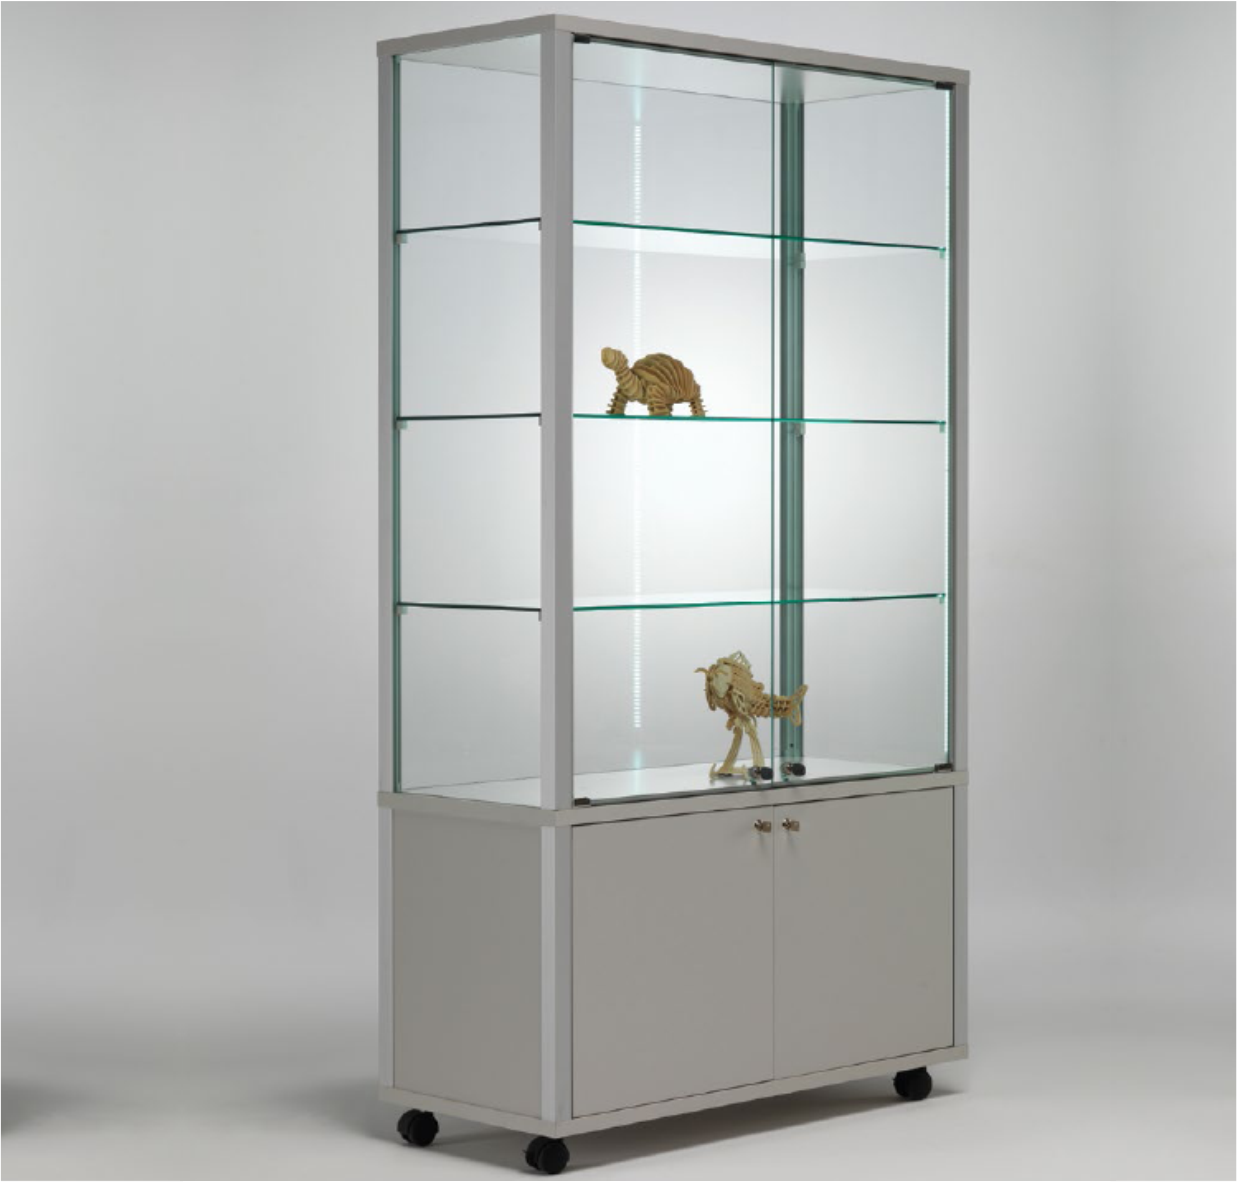 LIA M 80-43M with Storage Cabinet Floor Display Cabinet Aluminum Framed Glass Anti-Dust